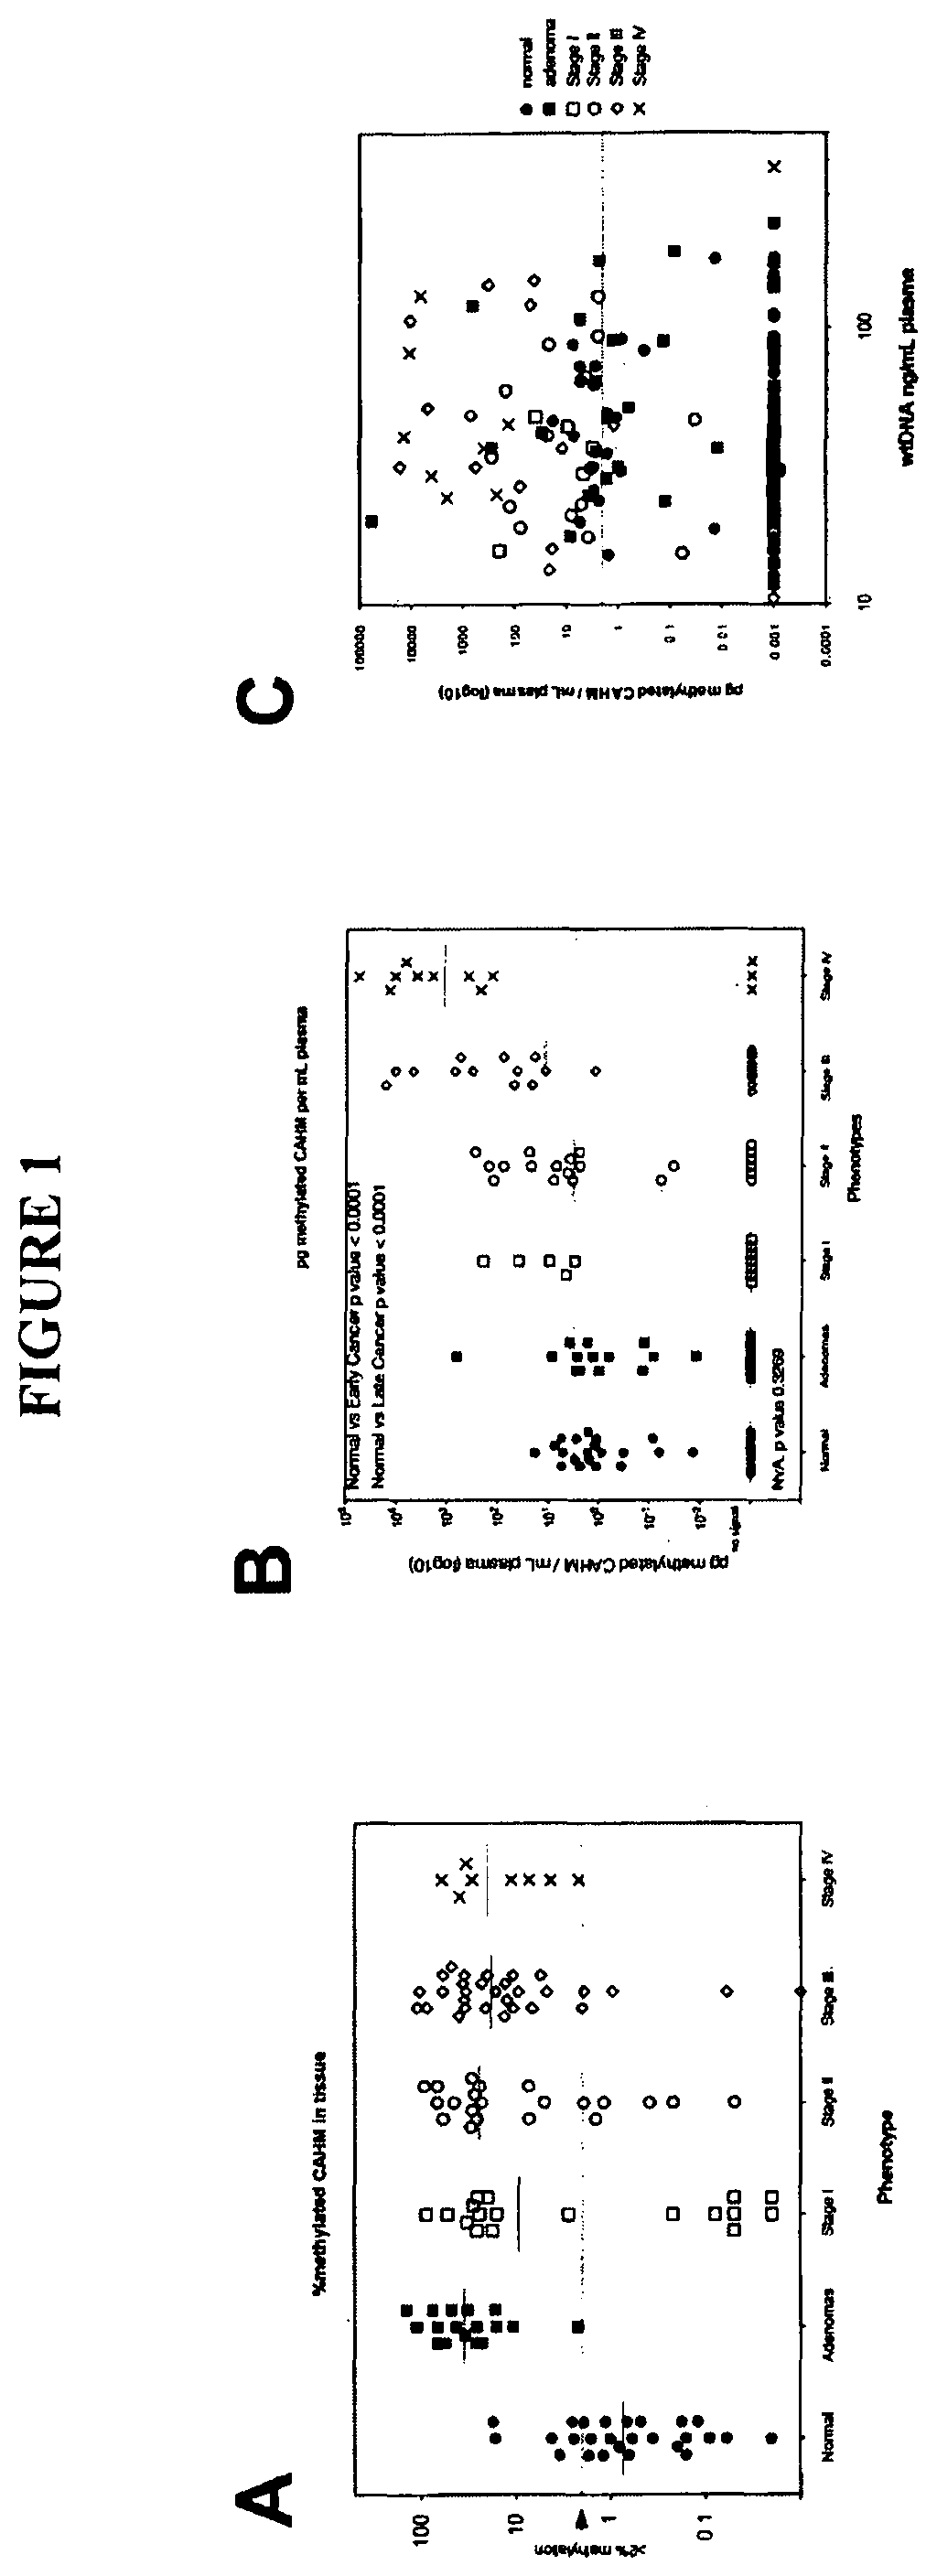 Method of screening for colorectal cancer